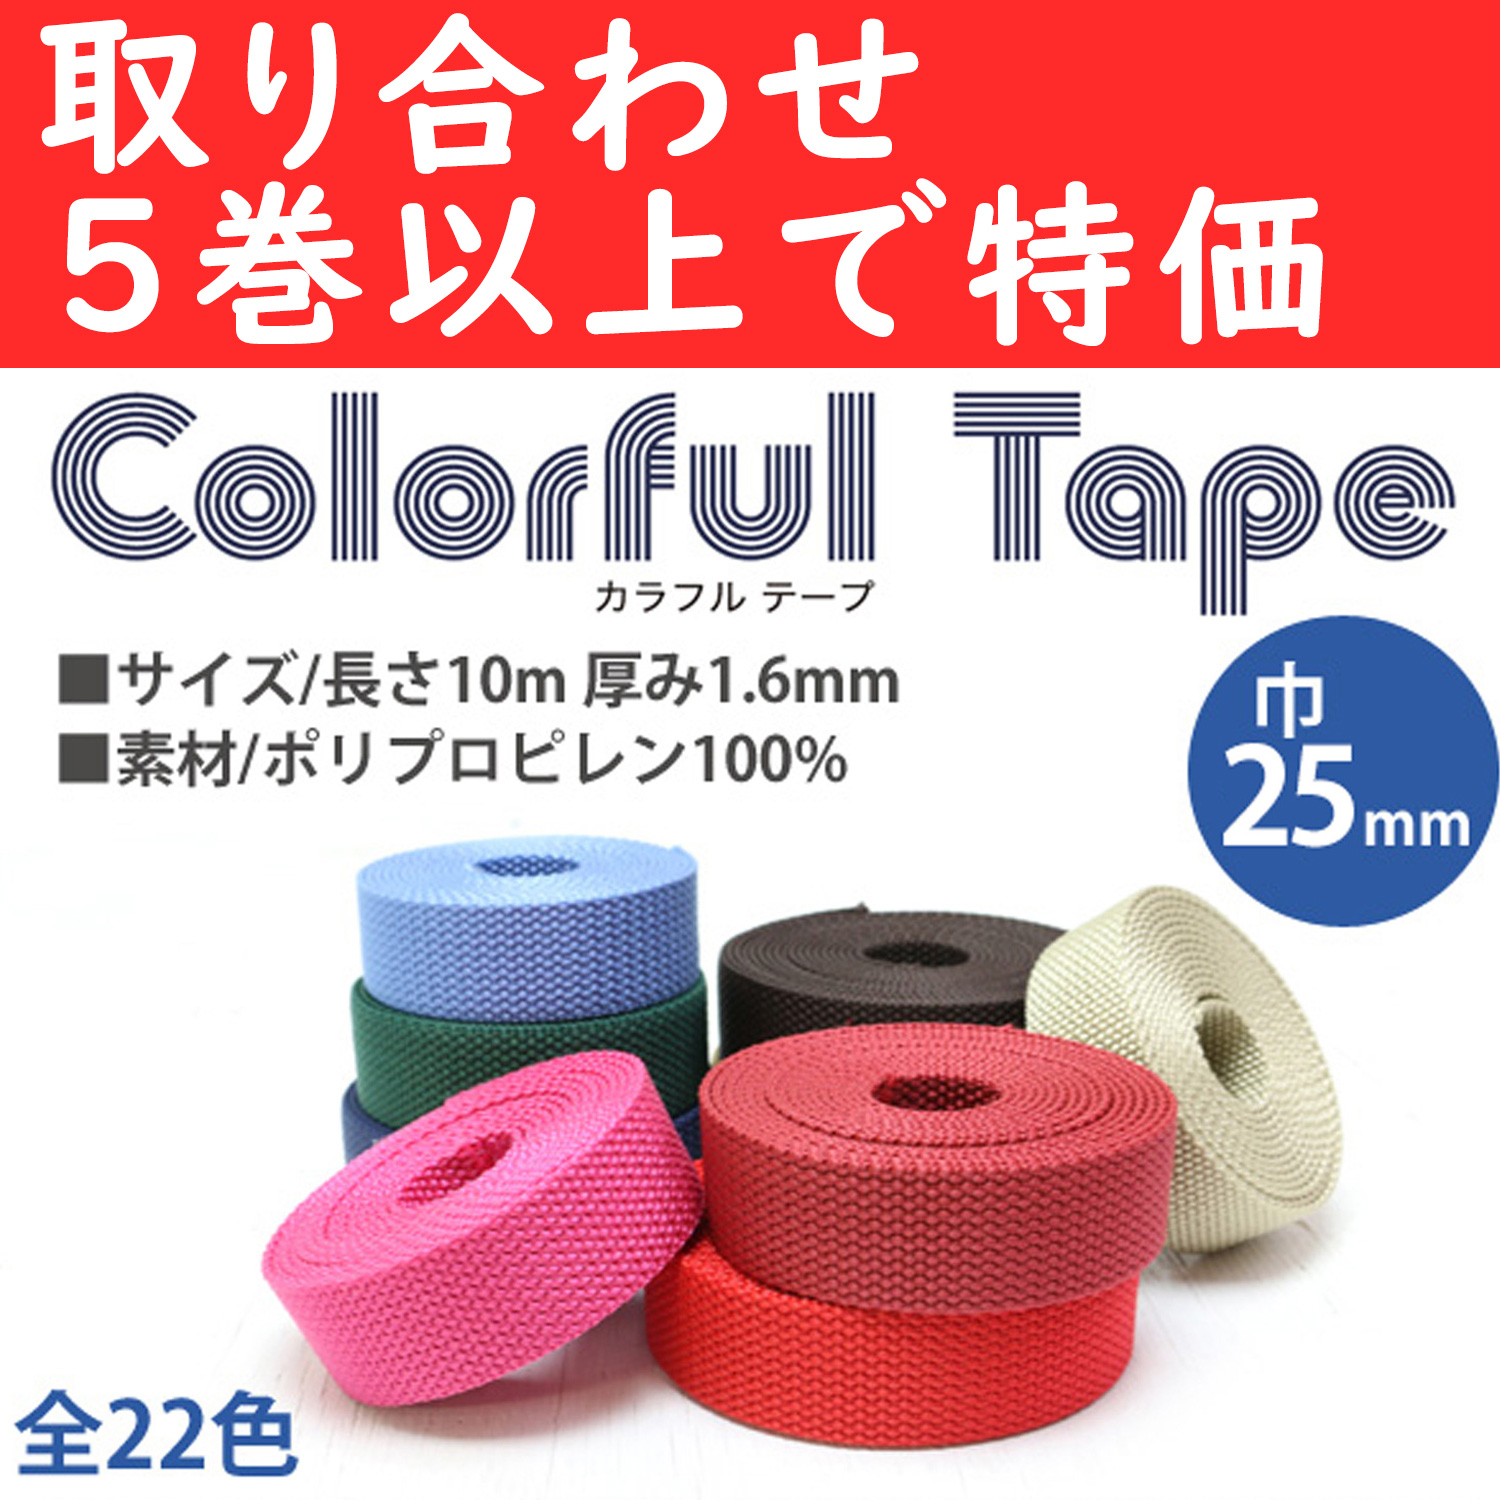 MHP2510-OVER5 Polyester Tape width 25mm x 10m Bulk Price for 5 units or more (roll)